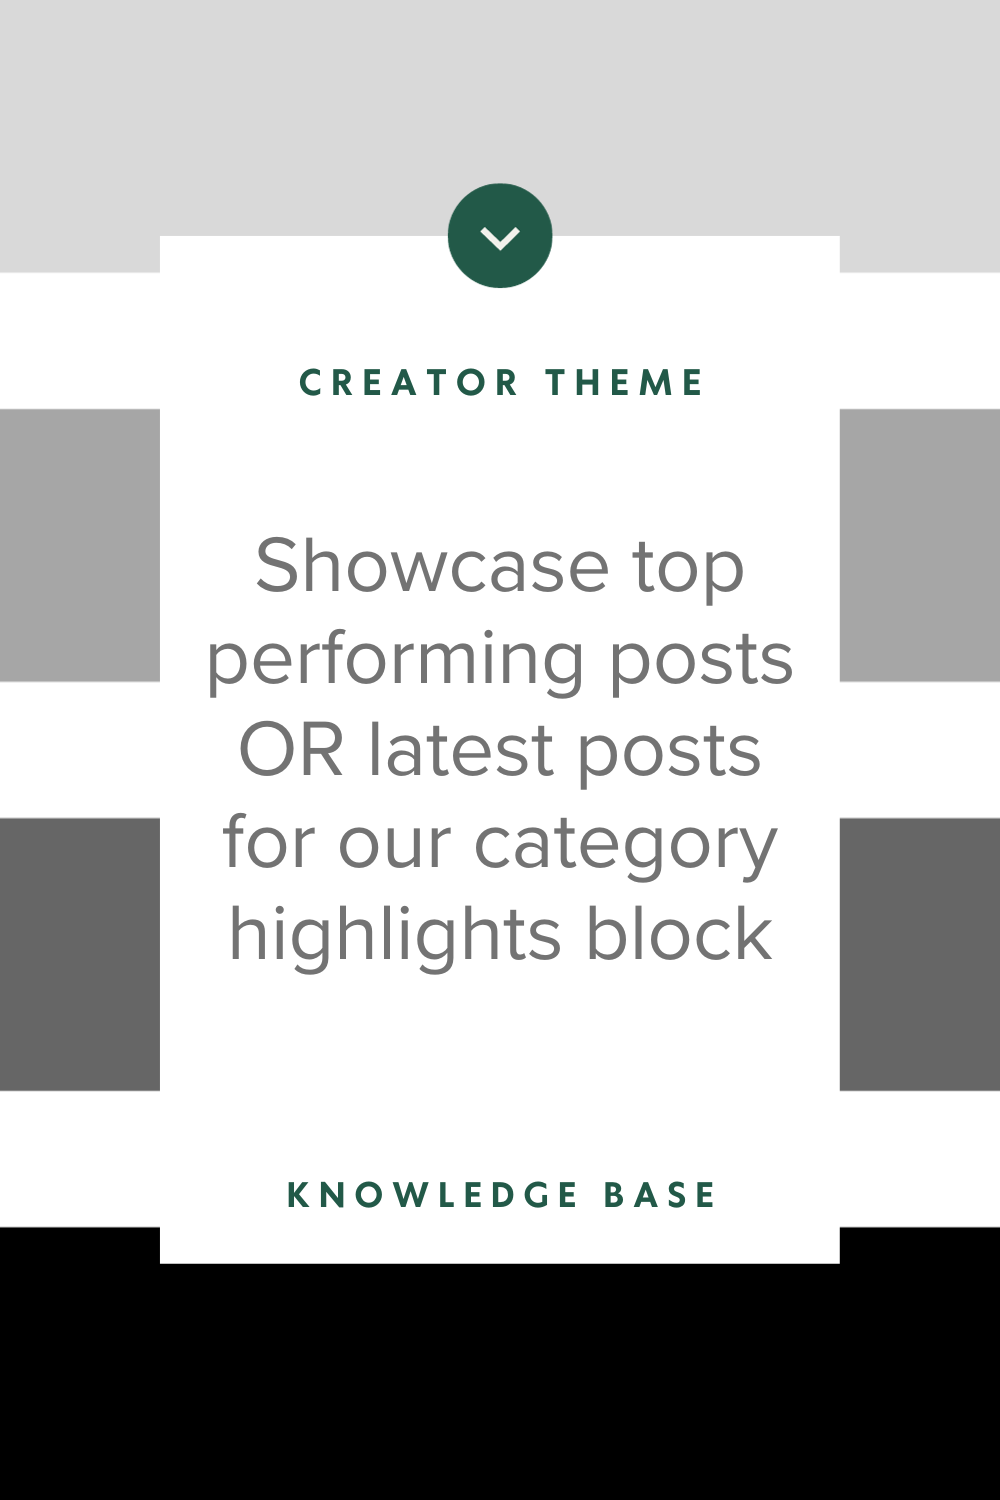 How to showcase top performing posts by category